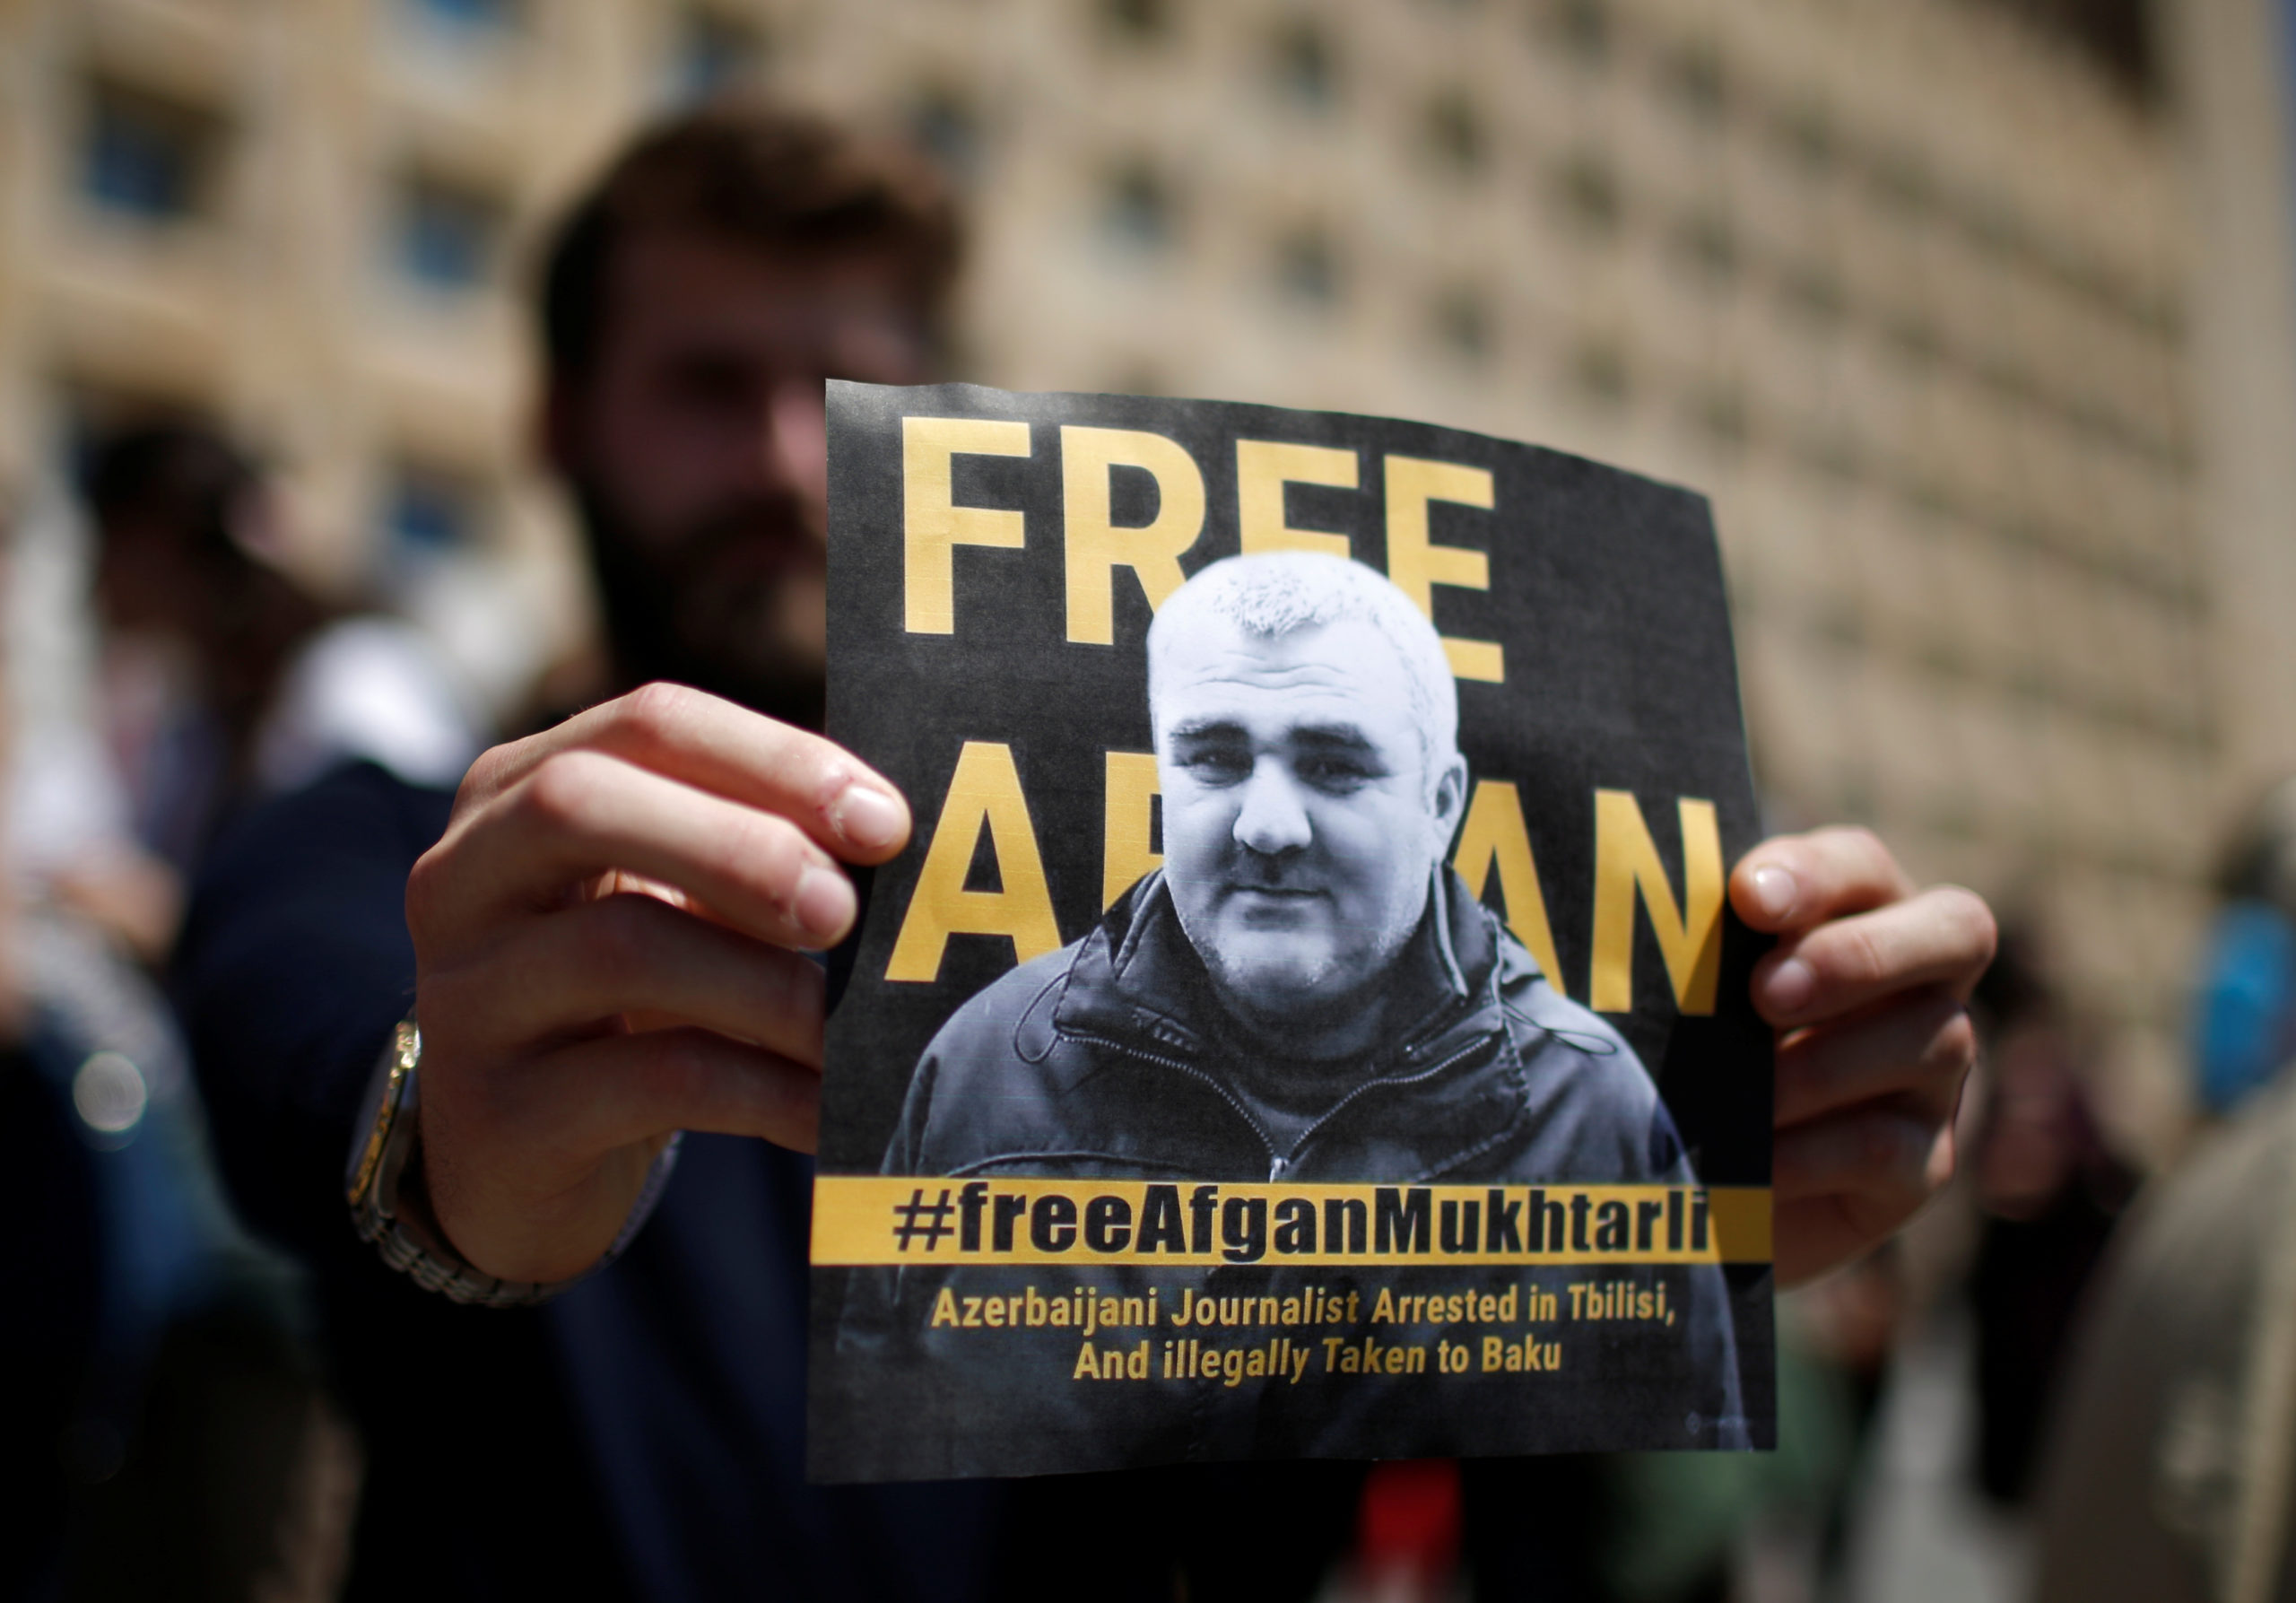 A man attends a rally to support an Azerbaijani Journalist Afgan Mukhtarli, who was abducted in Tbilisi on May 29 and now is in detention in Baku, in Tbilisi, Georgia May 31, 2017. REUTERS/David Mdzinarishvili